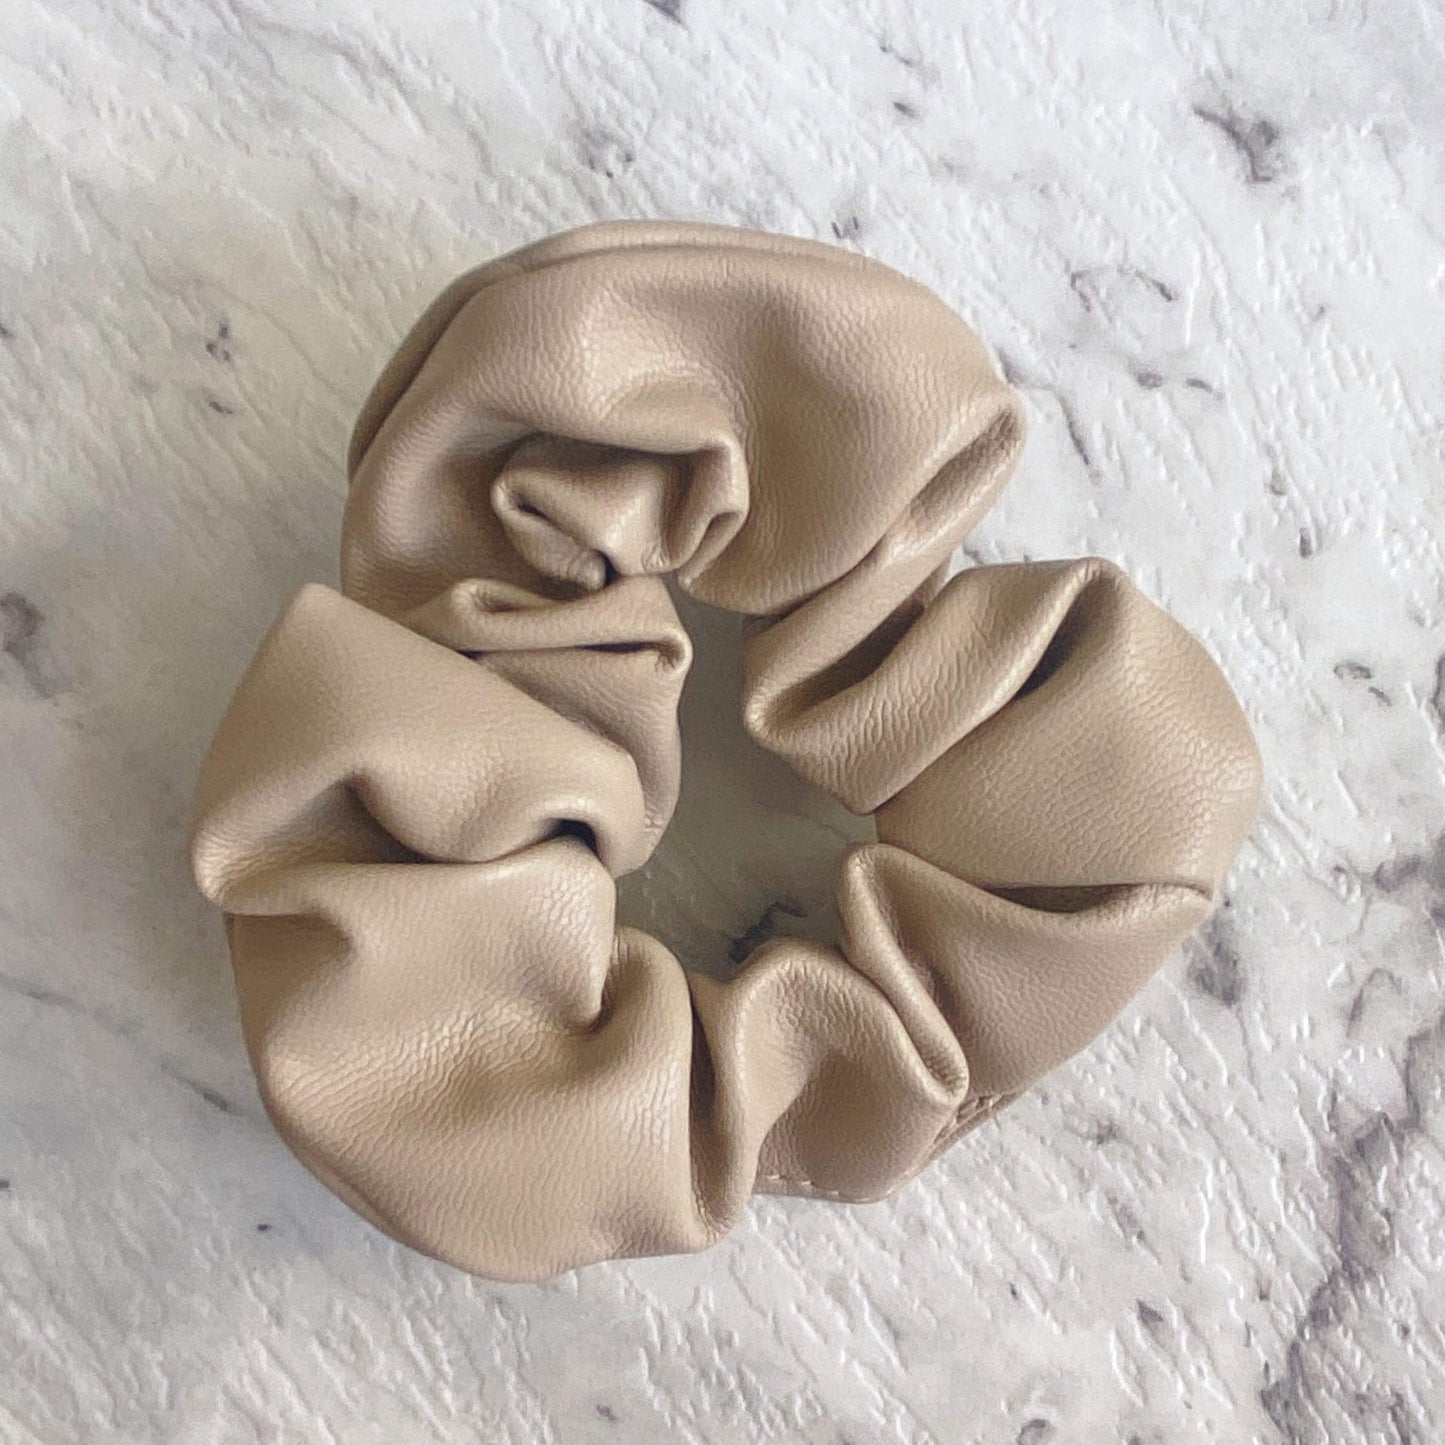 Latte faux leather hair scrunchie perfect for all hair types that compliments any style.